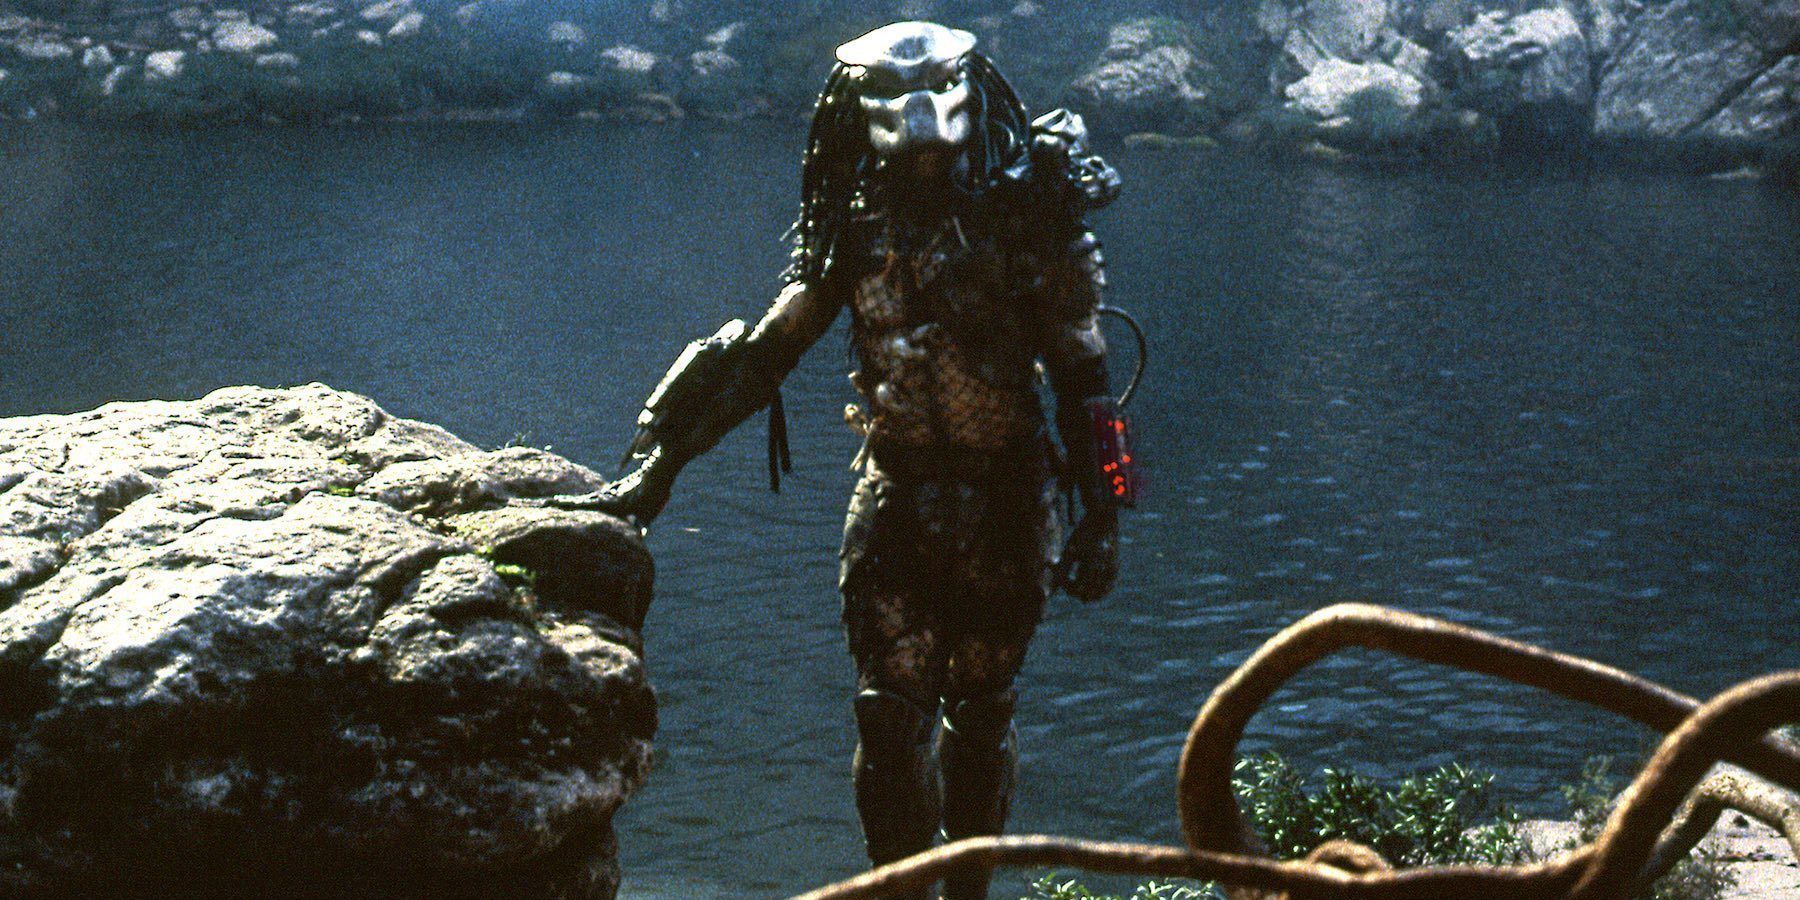 The Predator emerges from the water in Predator (1987)